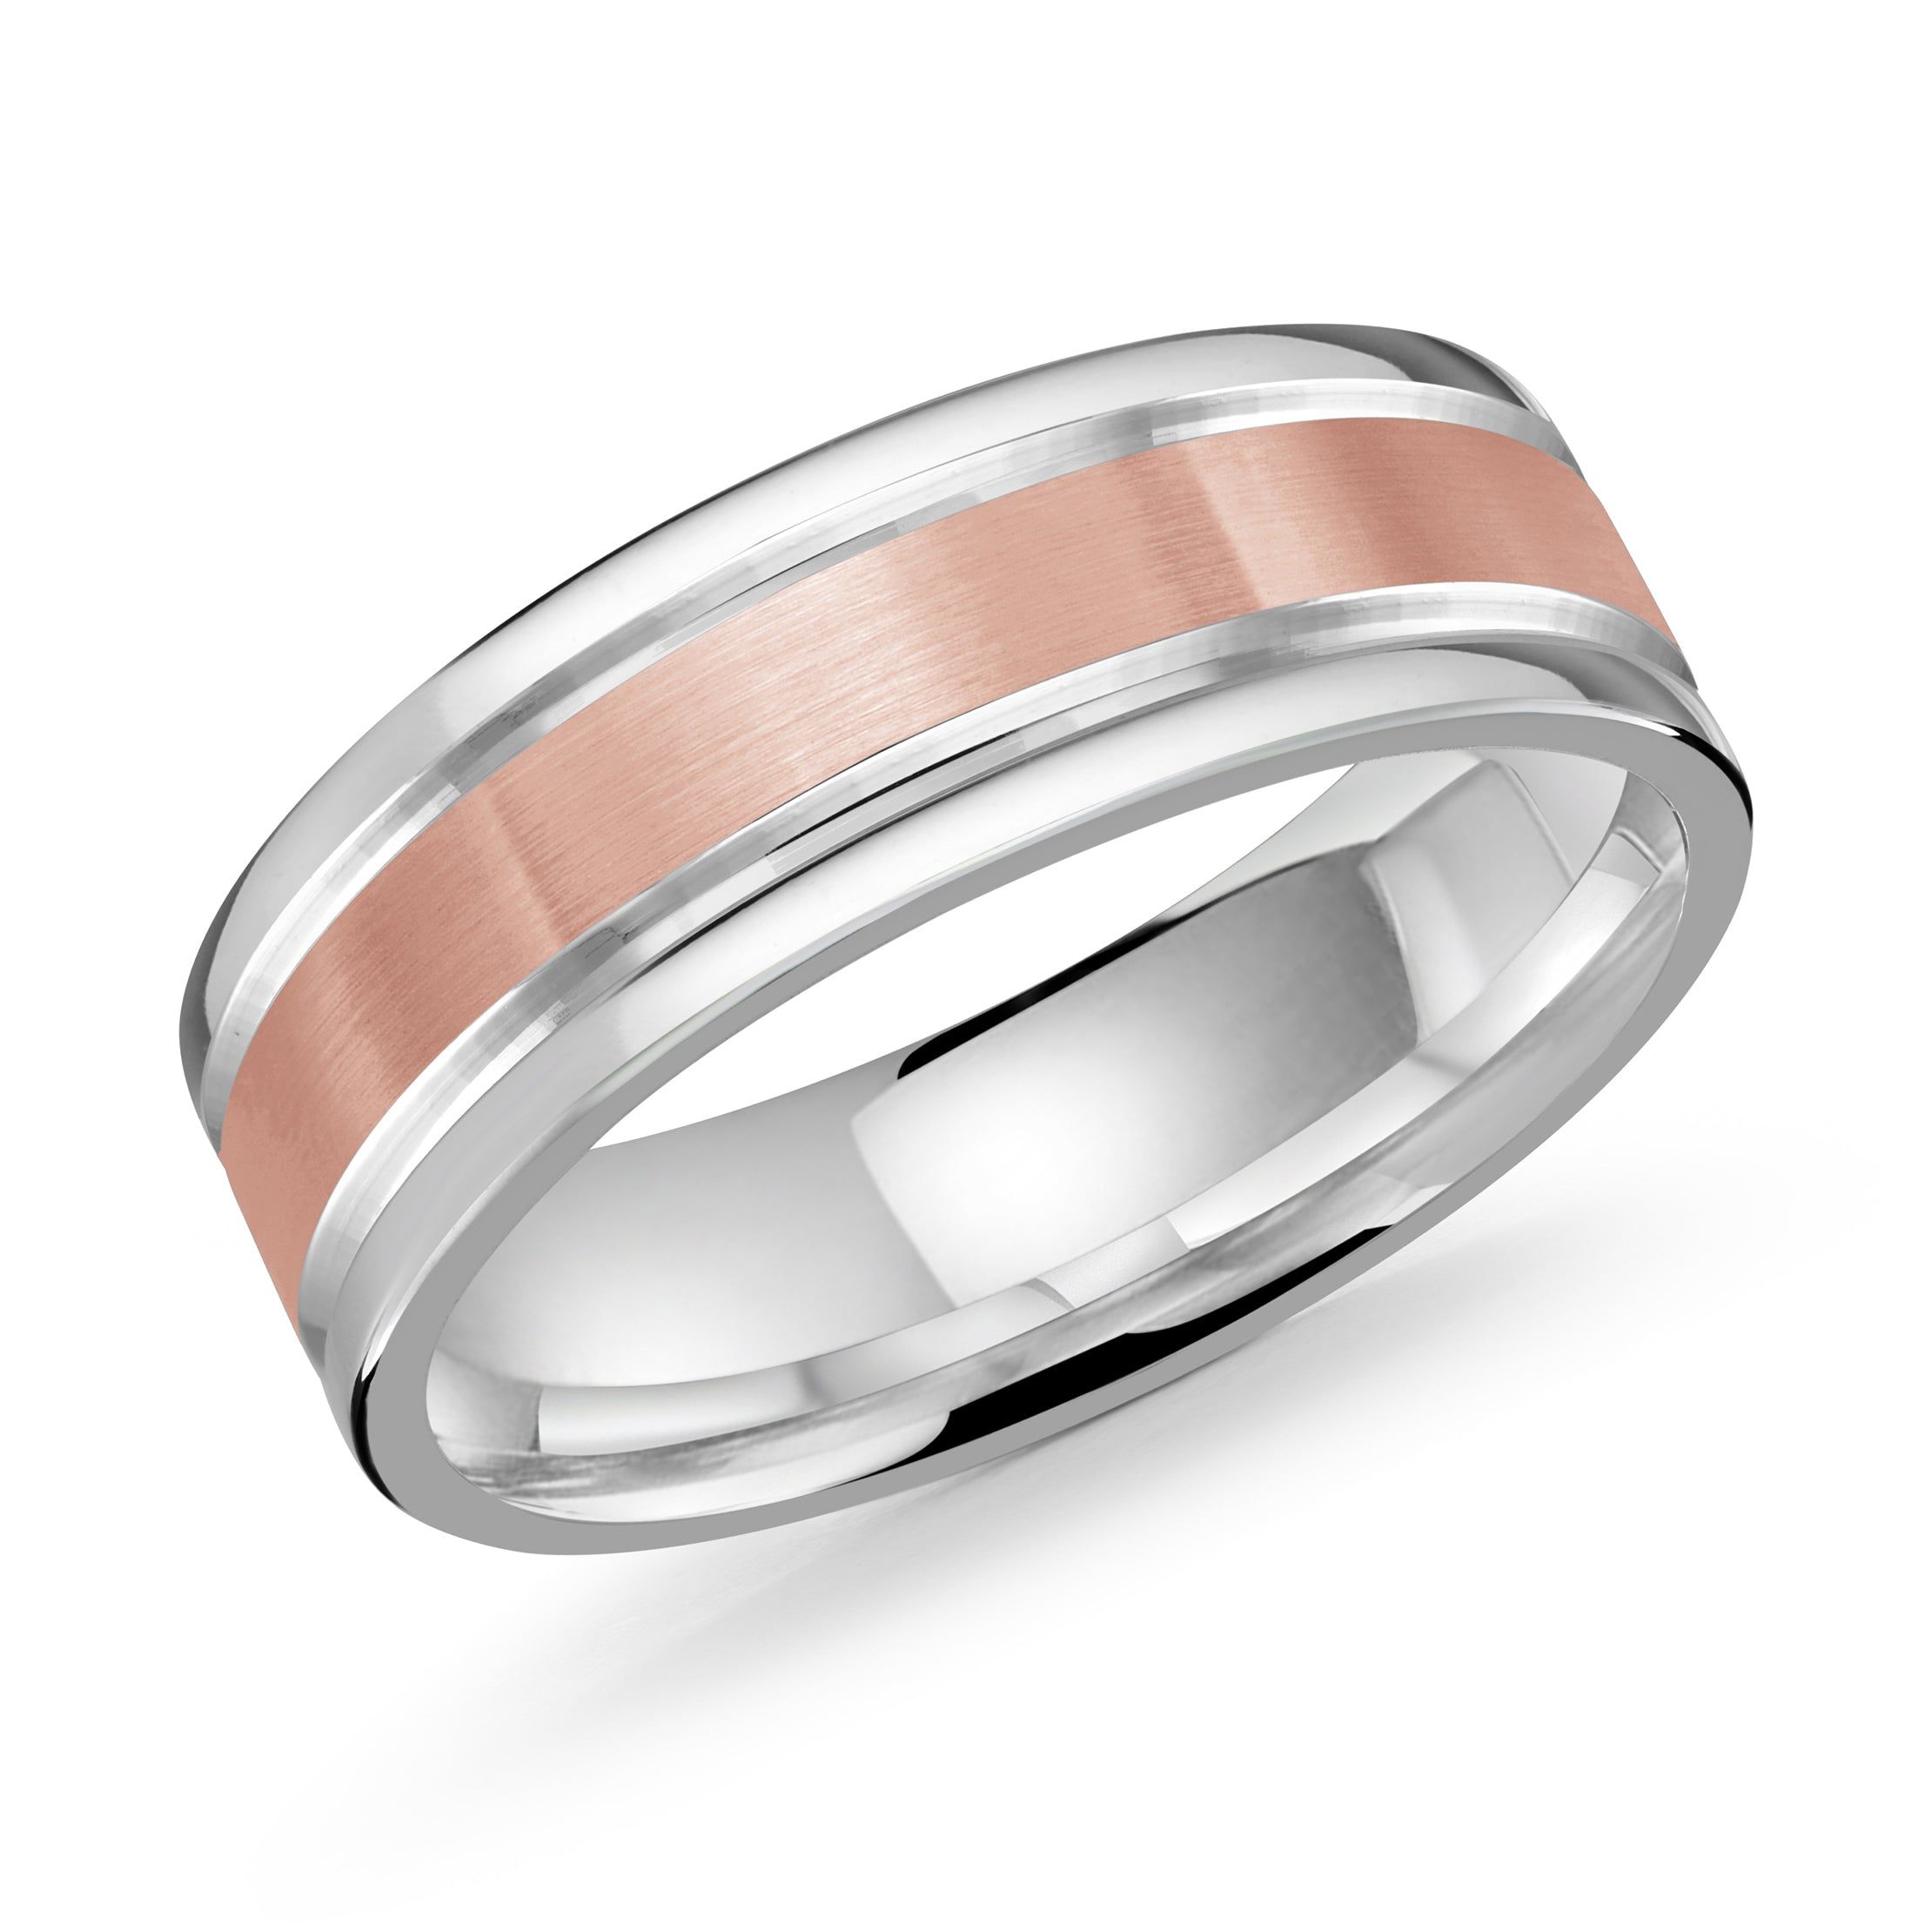 Men's 7mm Two-tone Brushed And Beveled Wedding Ring